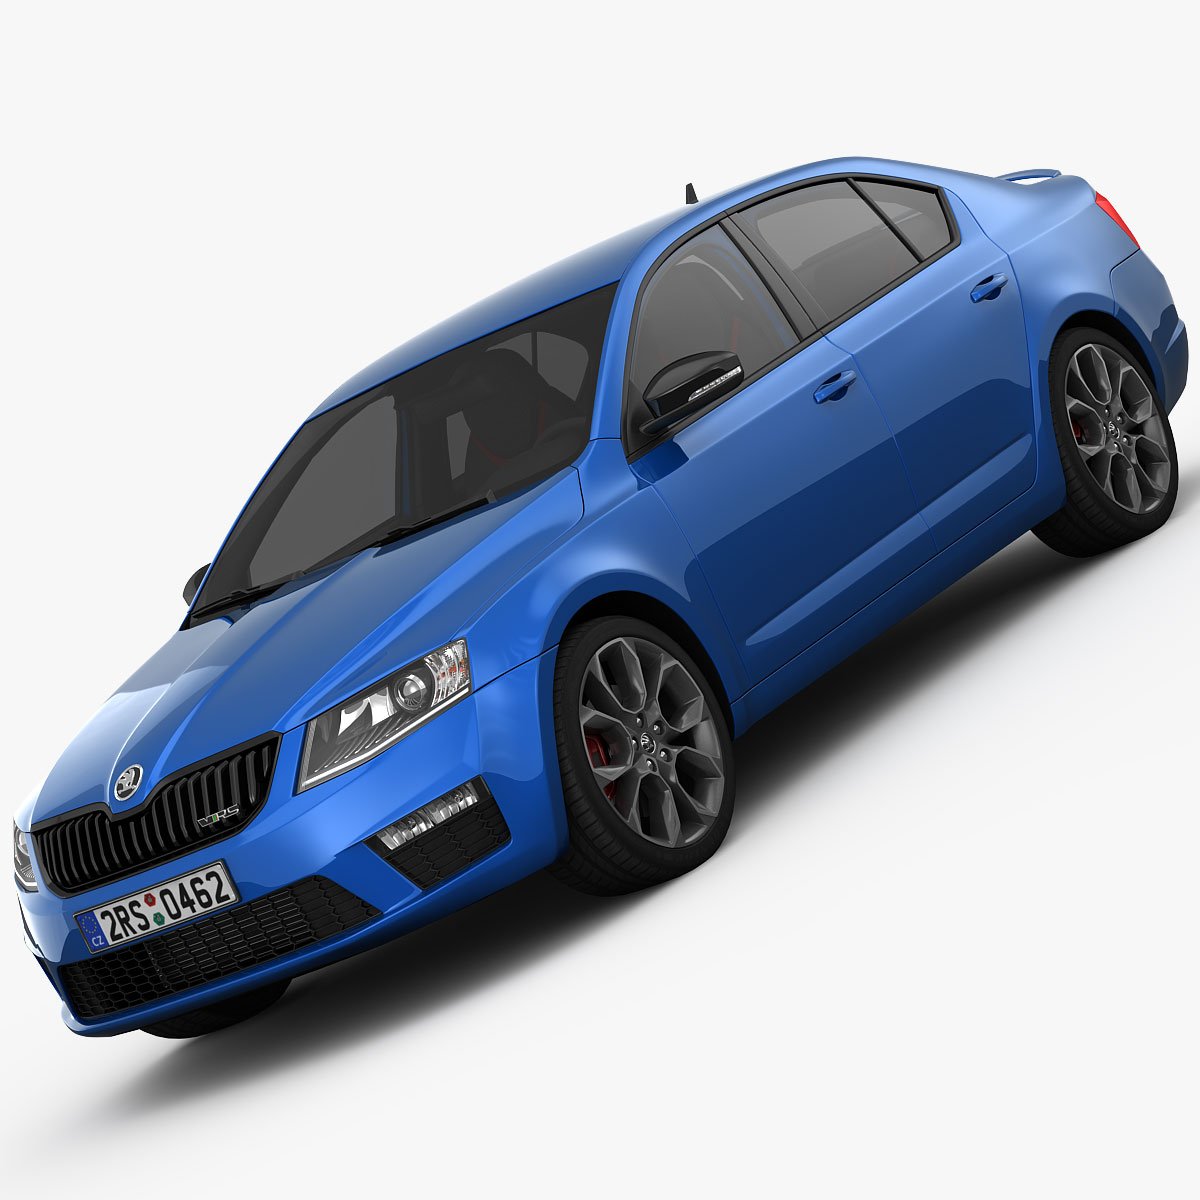 Skoda octavia rs 2014. Skoda Octavia RS 2015. Skoda Octavia RS 3.